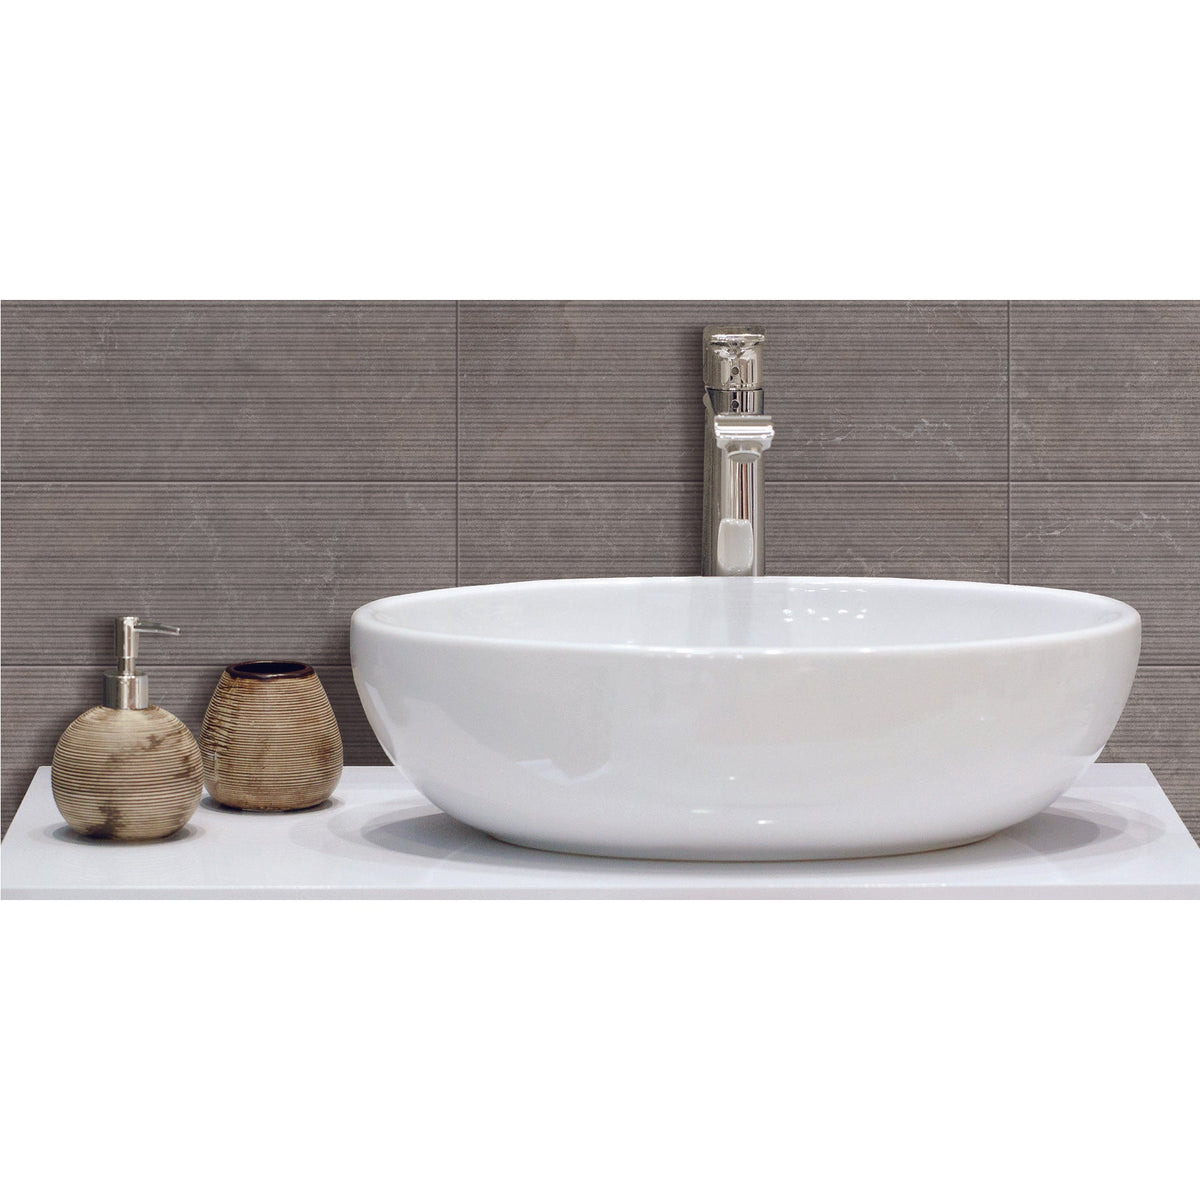 Daltile - Rhetoric - 8 in. x 24 in. Ceramic Wall Tile - Composition Grey Installed